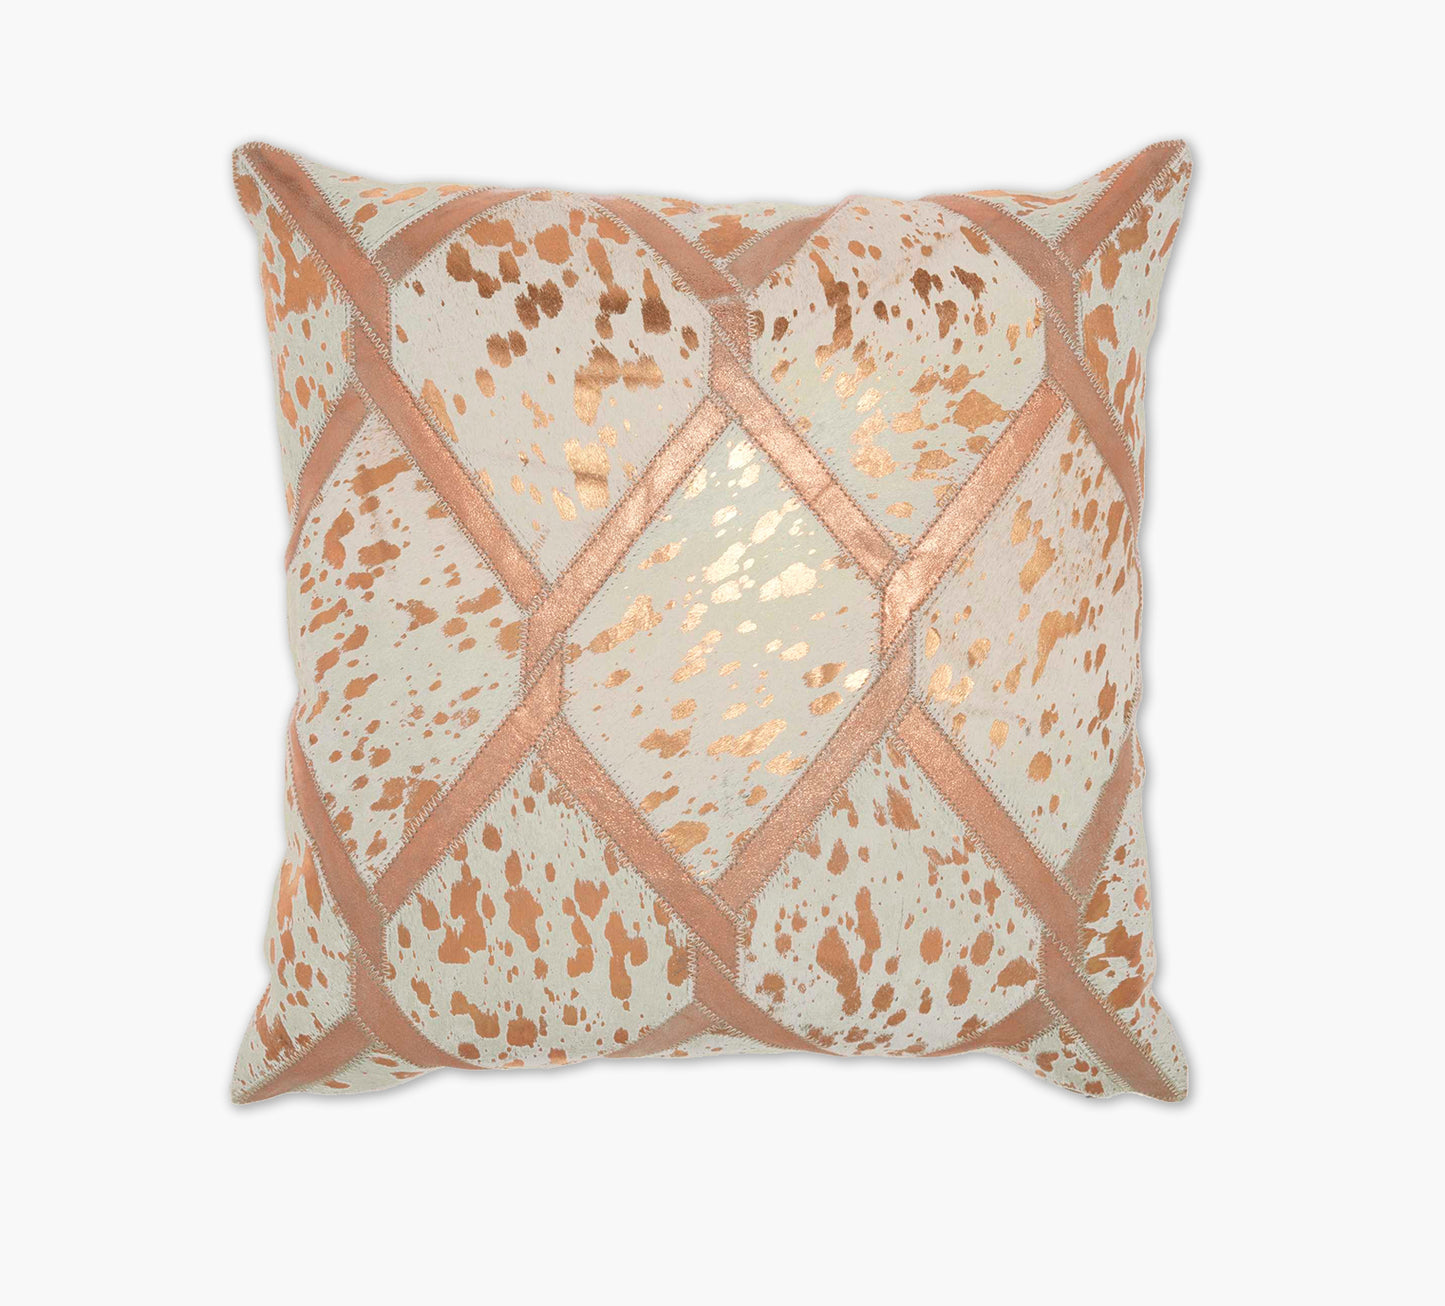 Natural Leather Hide Rose Gold Pillow 18 x 18